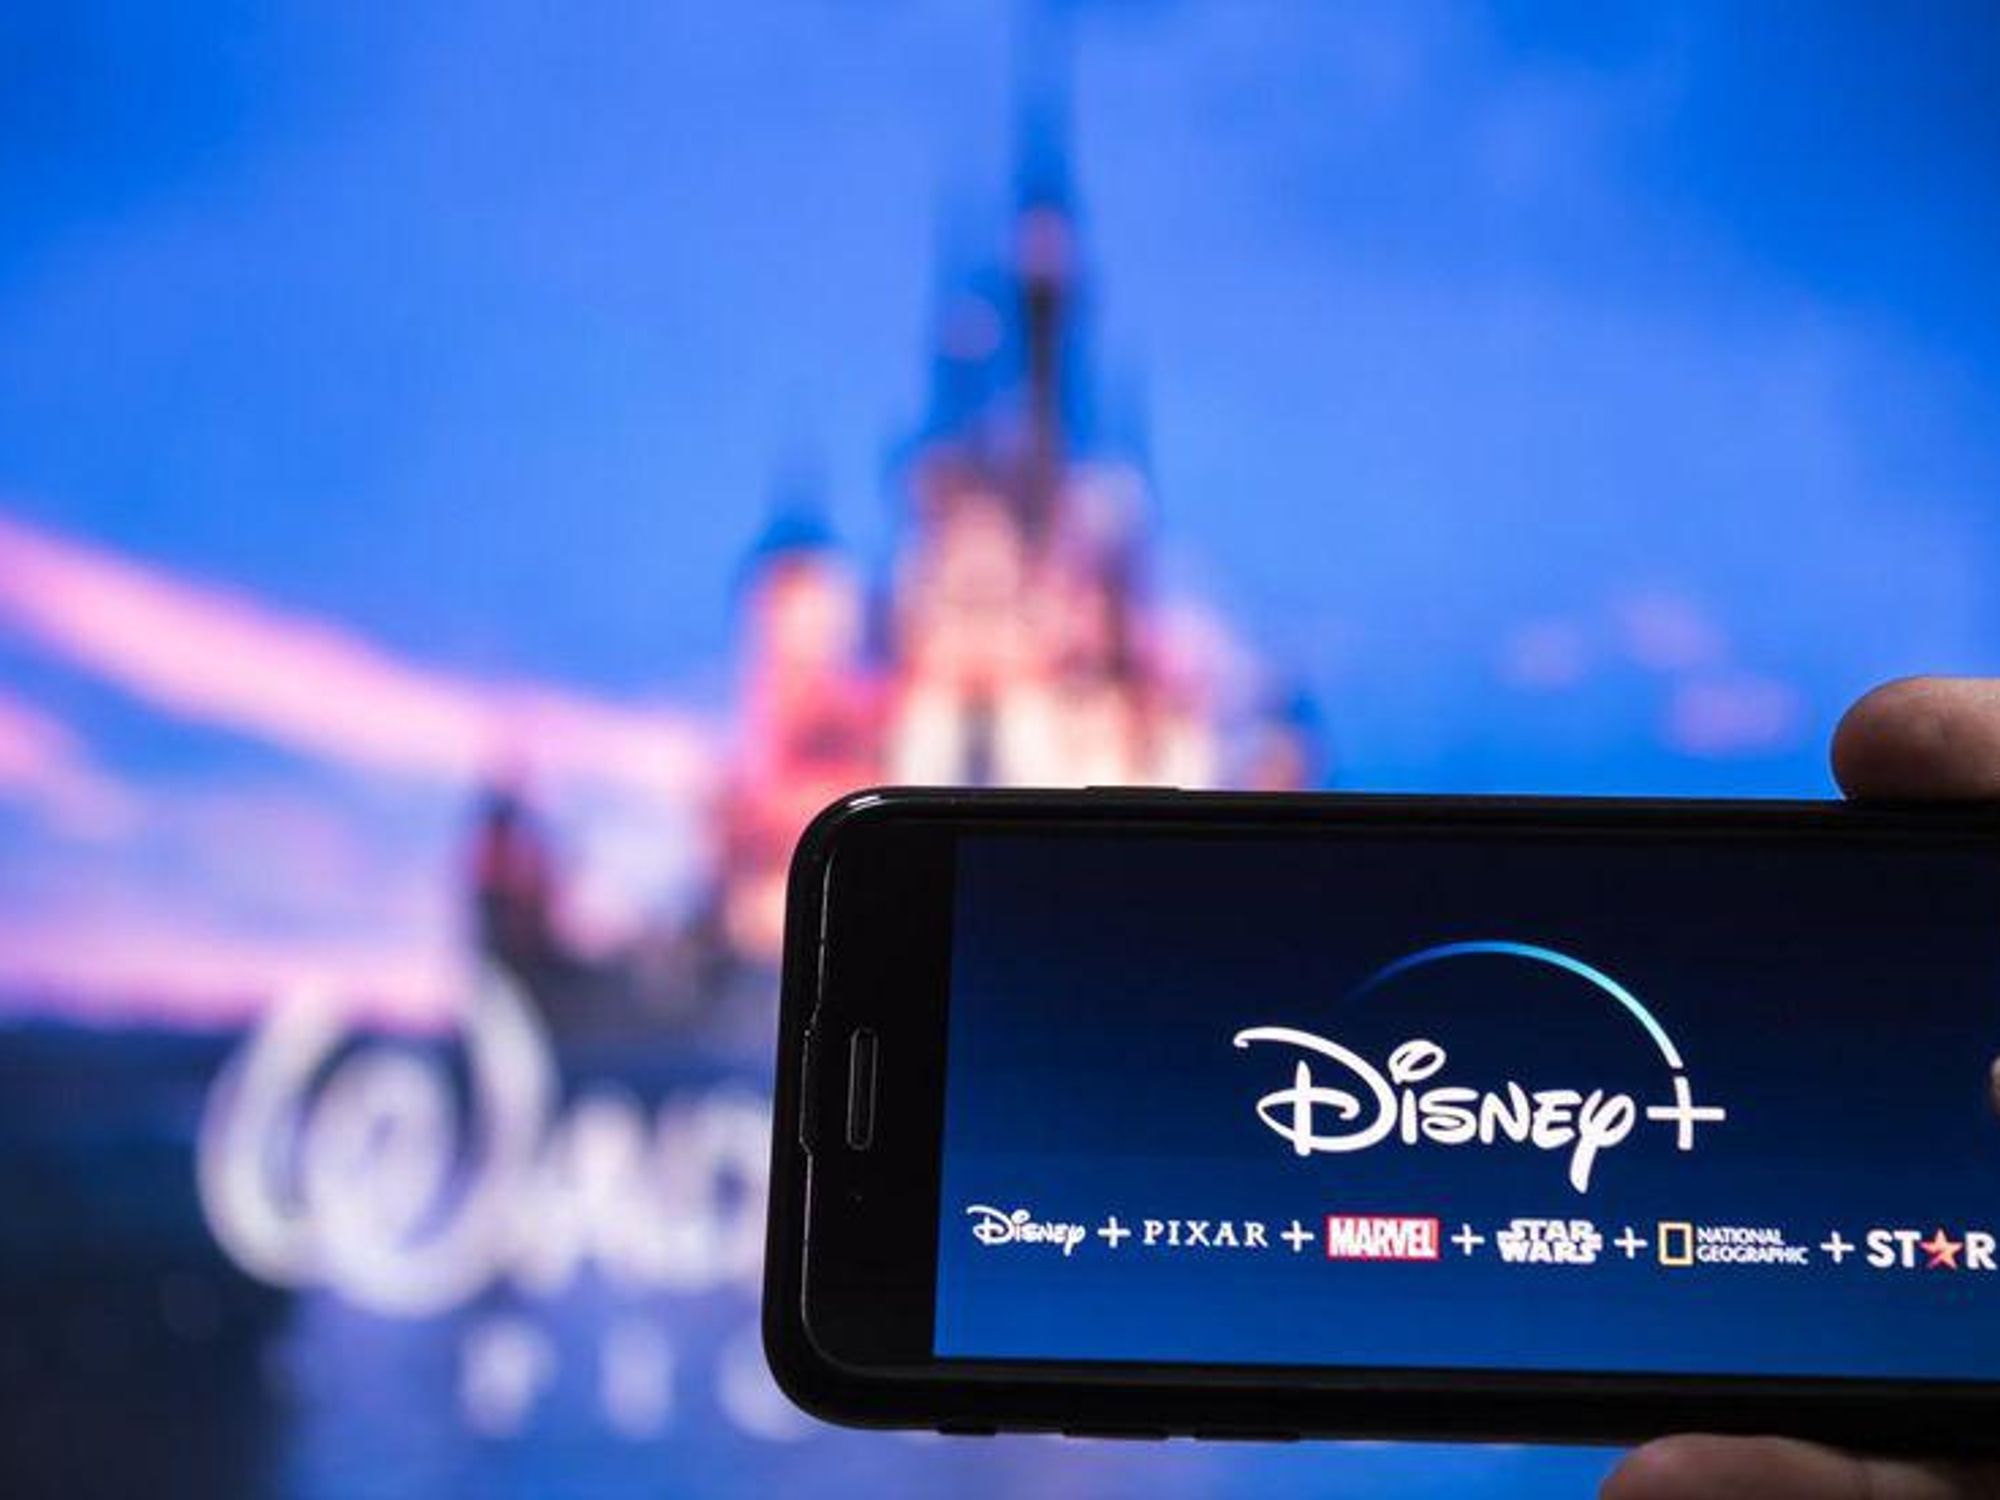 Disney Plus Day Hopes to Boost Subscribers With New Content